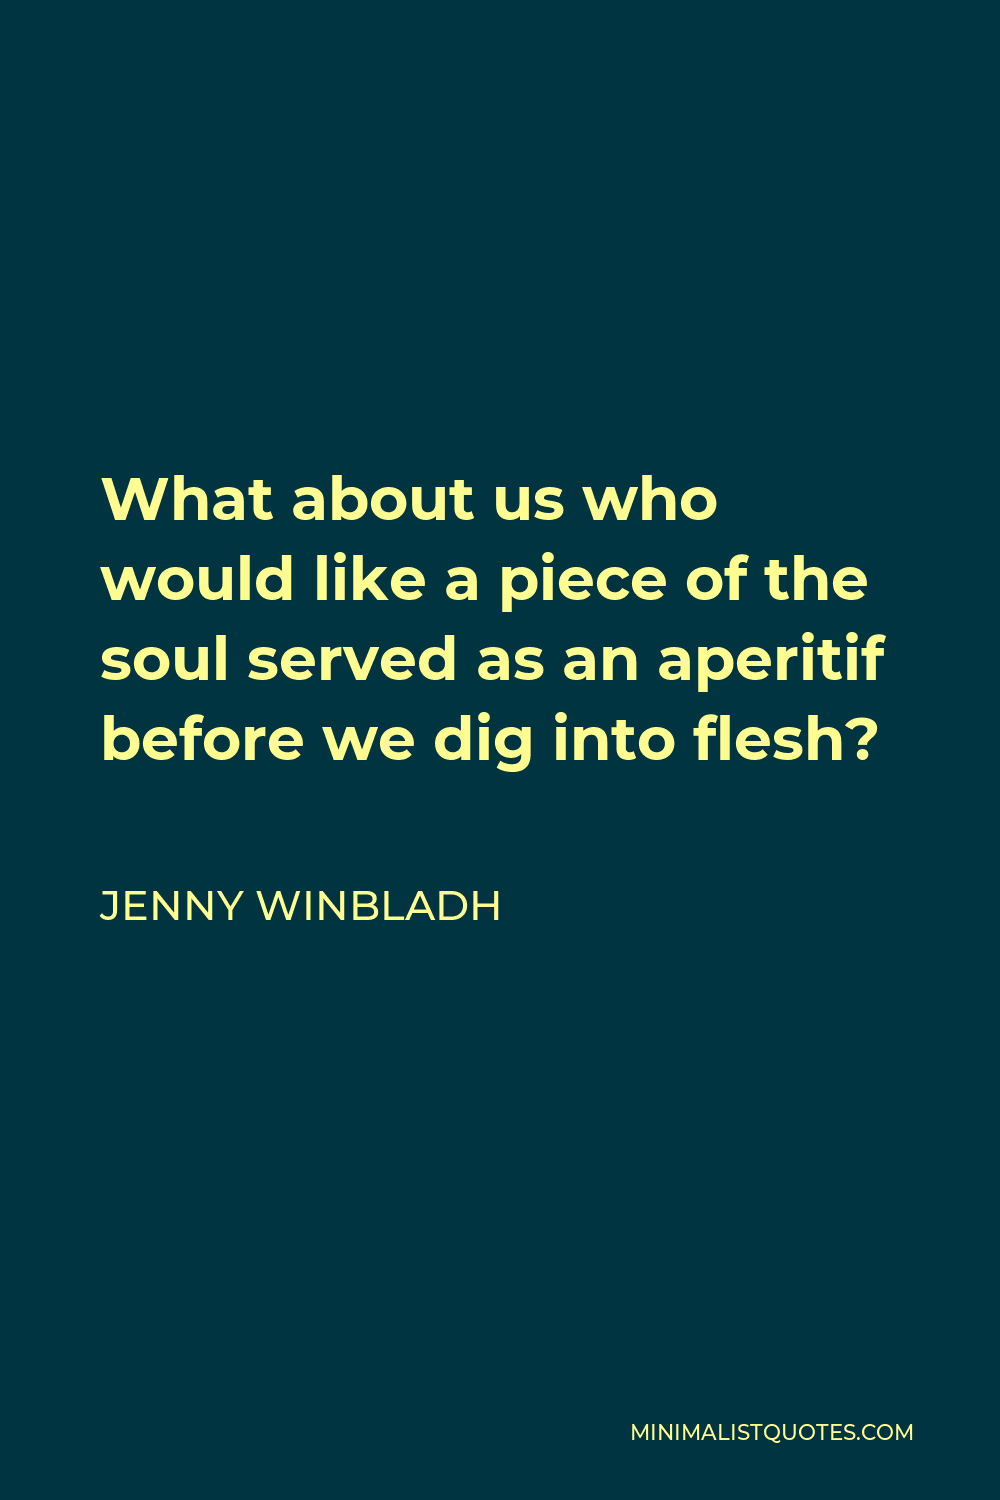 Jenny Winbladh Quote - What about us who would like a piece of the soul served as an aperitif before we dig into flesh?